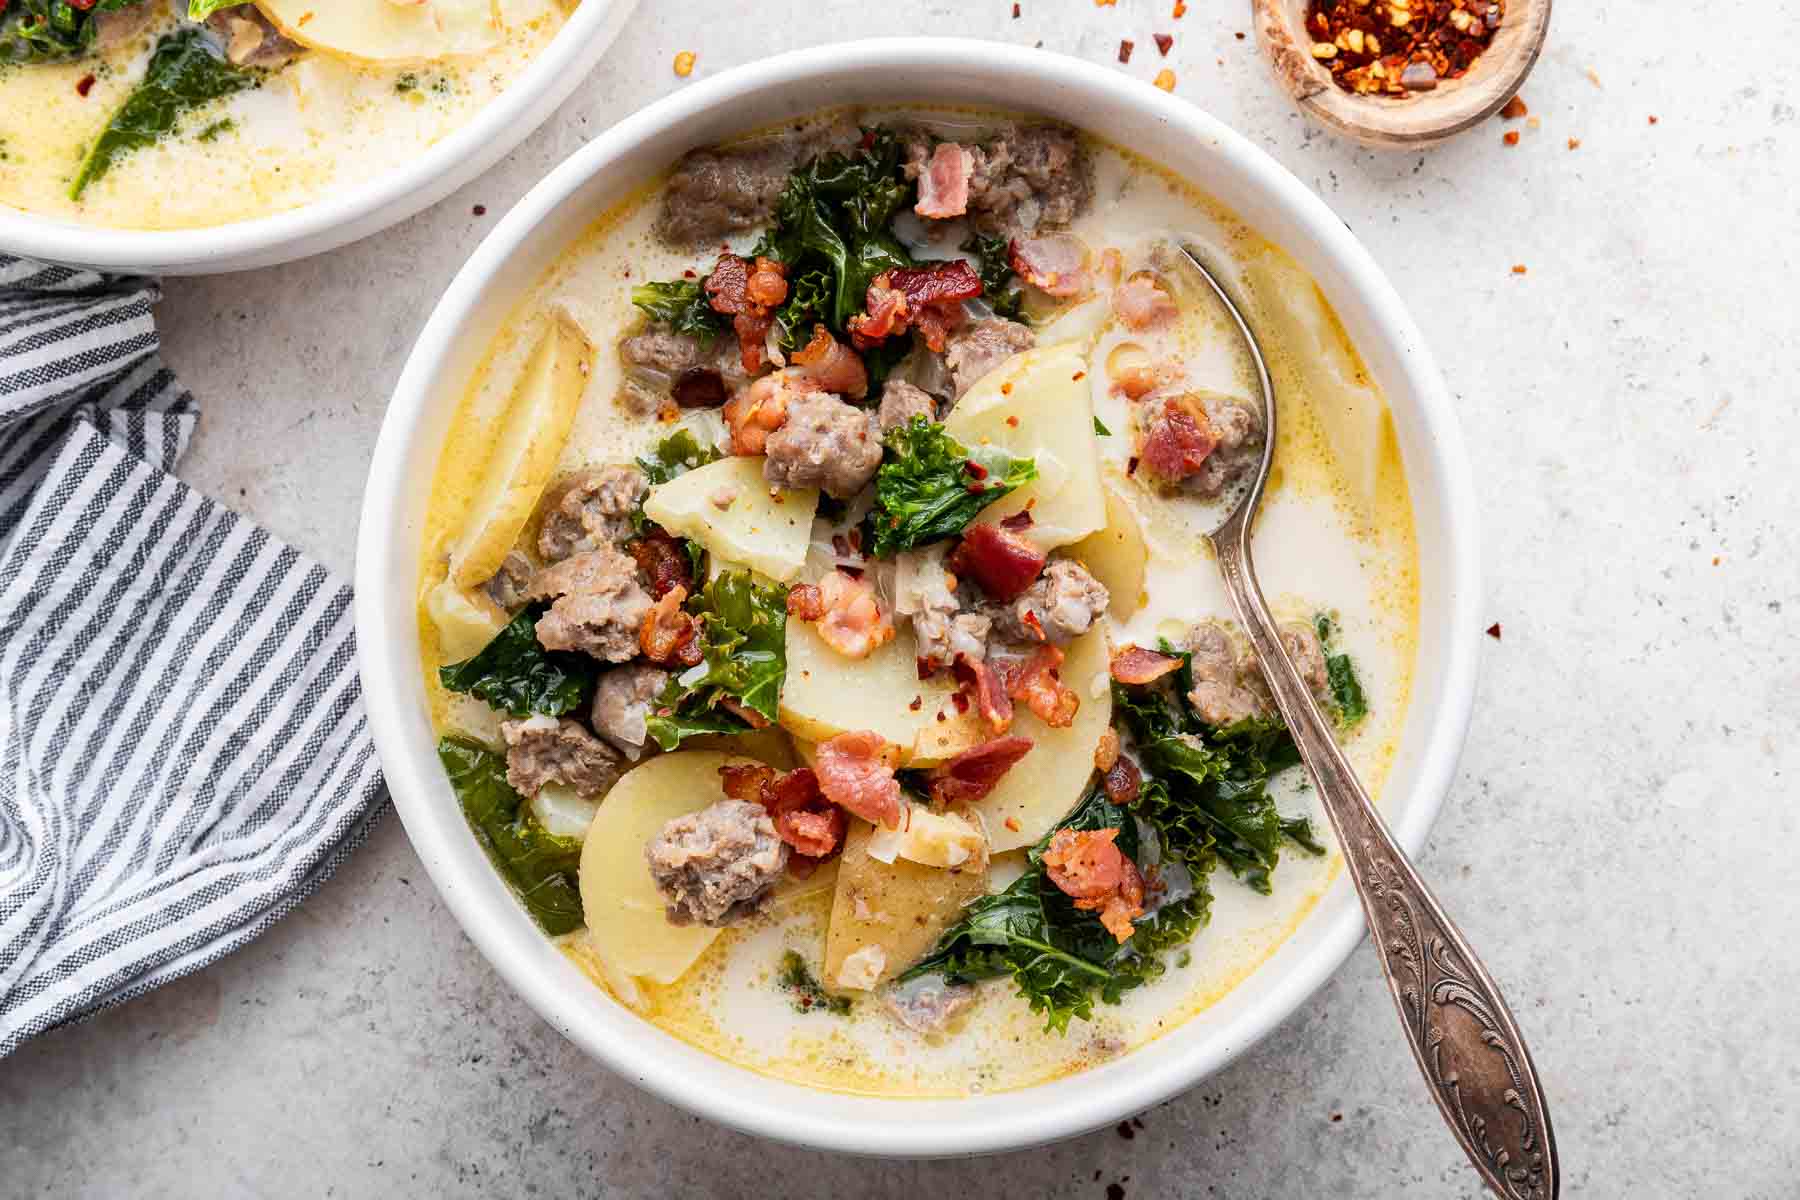 Horizontal image of zuppa toscana, a potato sausage soup with bacon and kale on top.